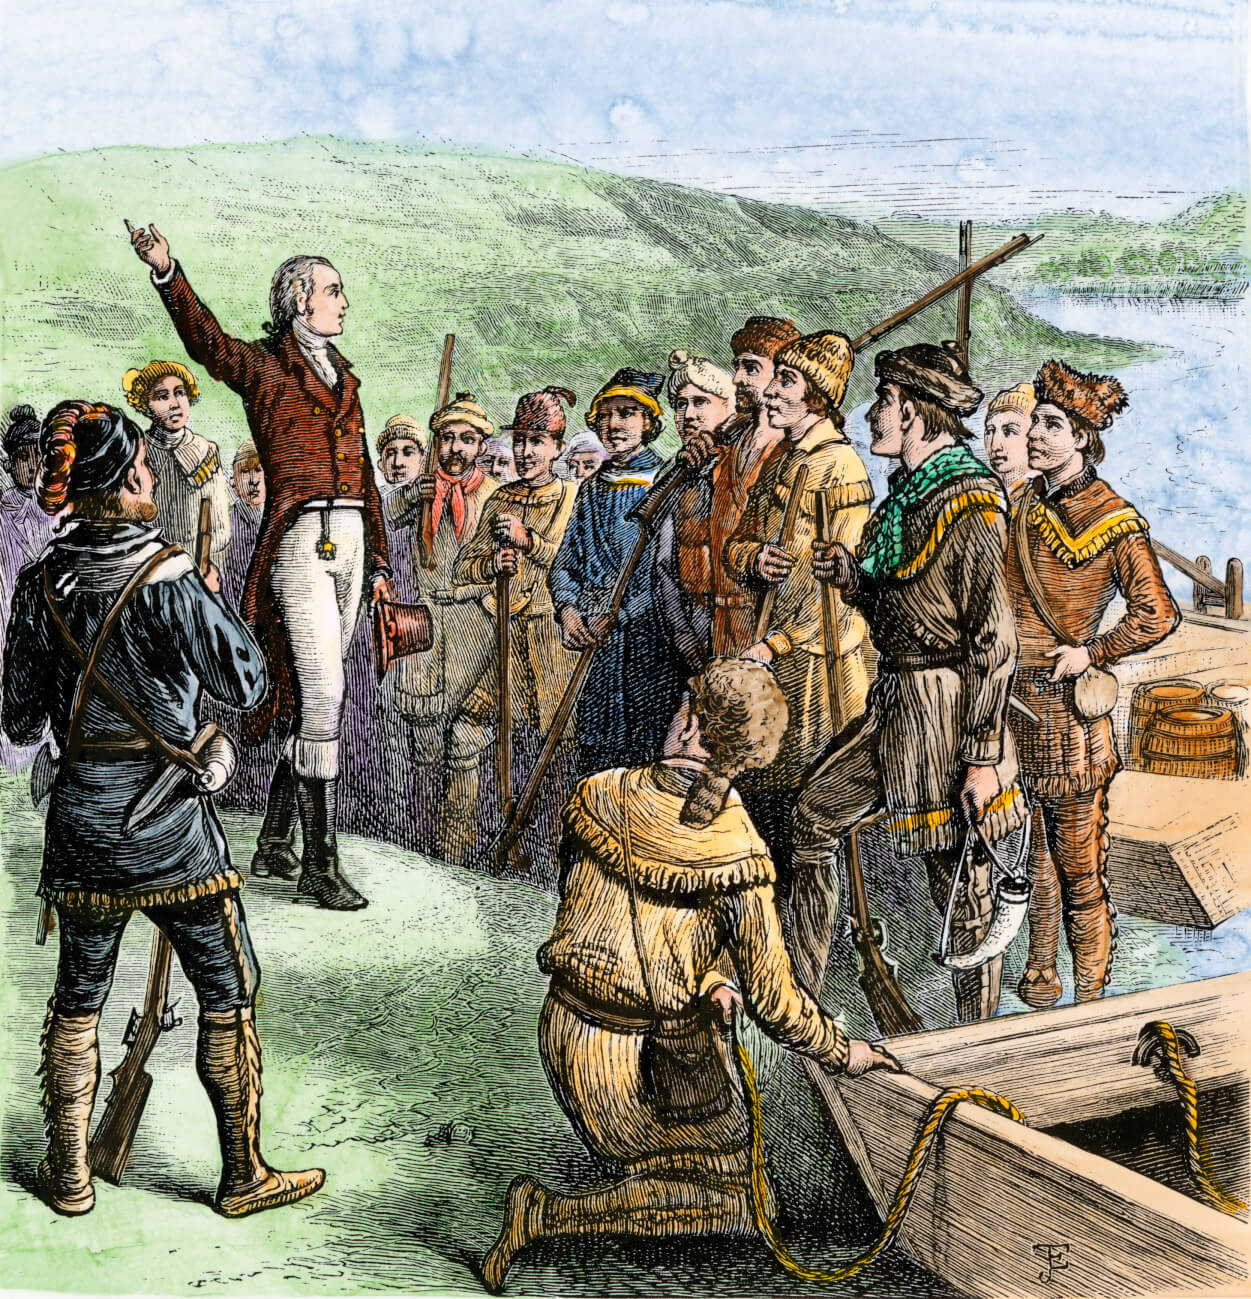 A man in 18th-century clothes addresses a crowd on the bank of a river